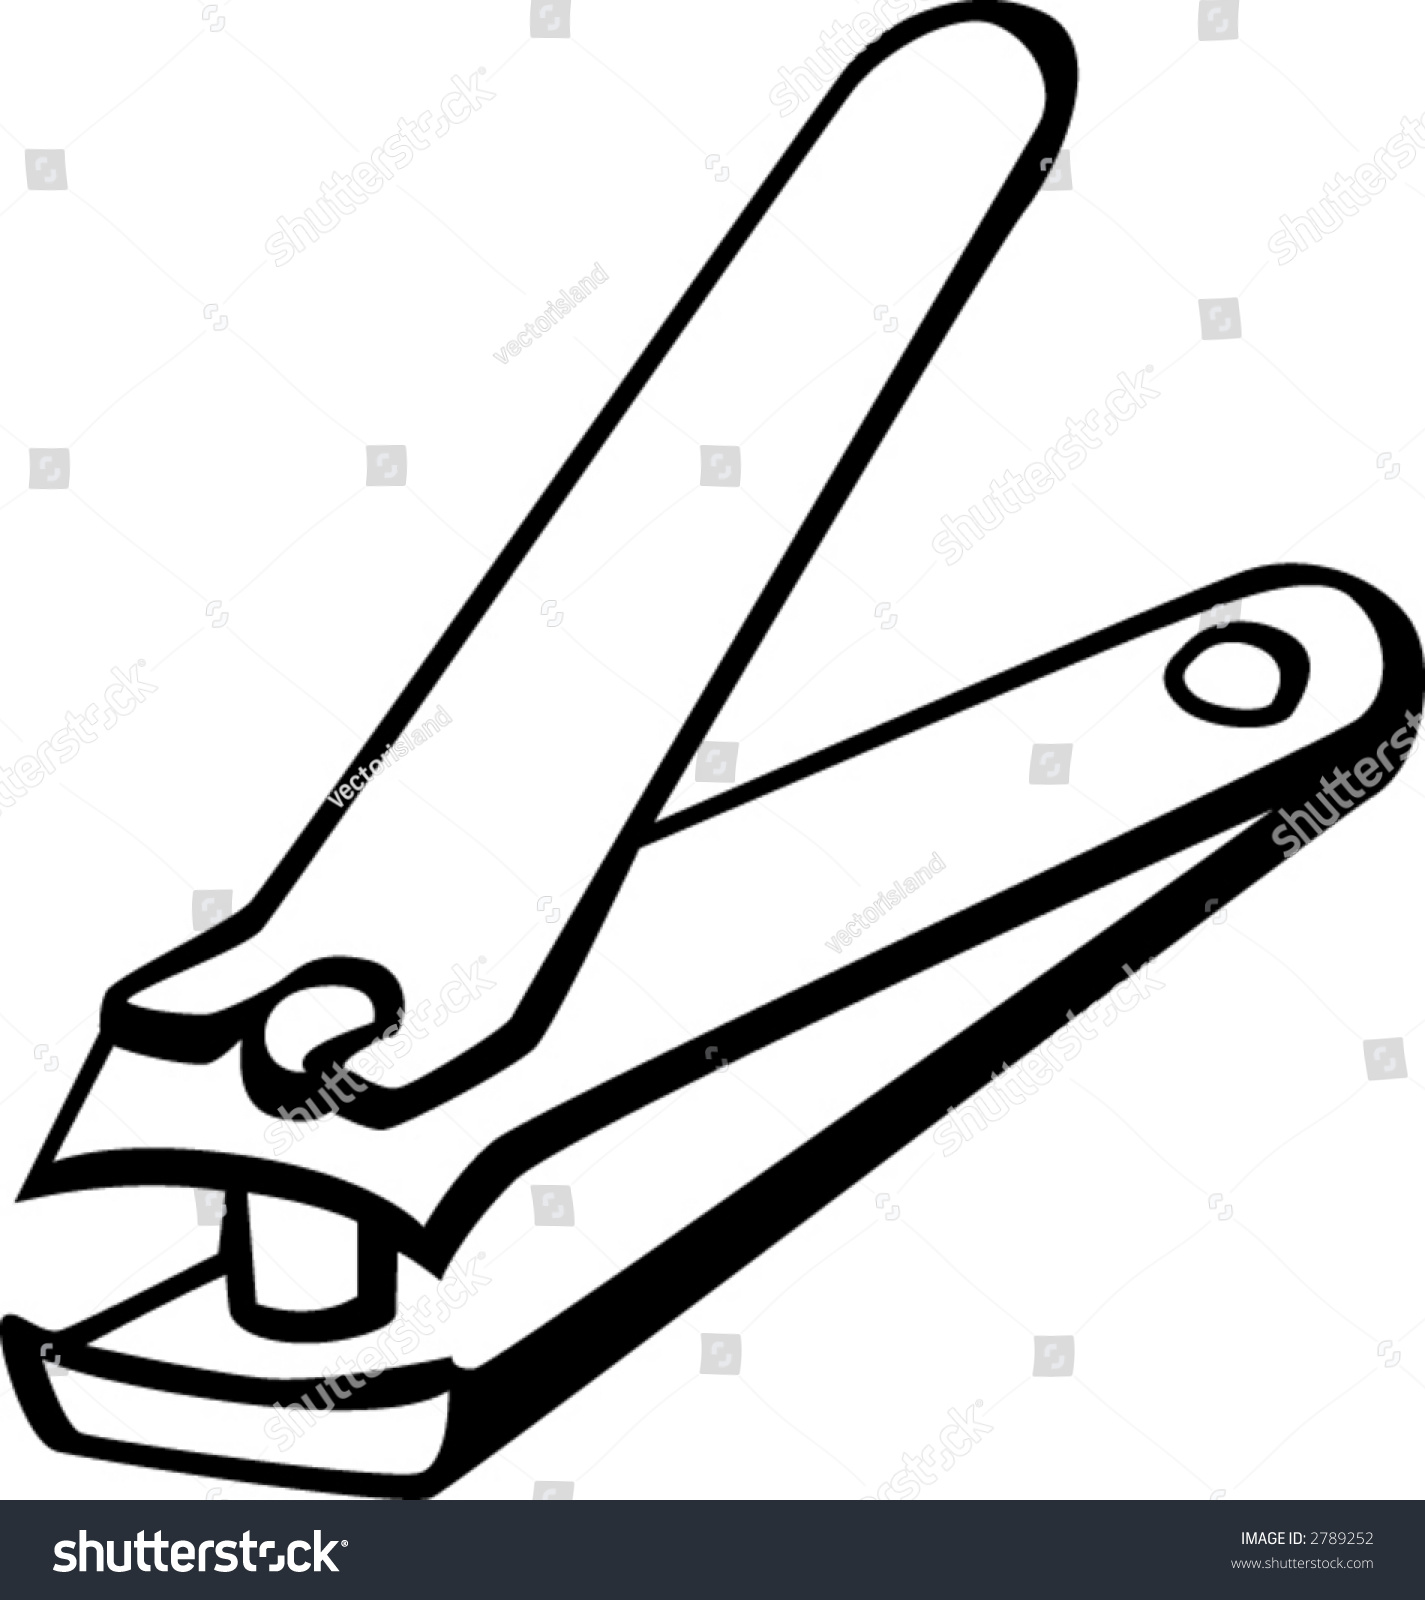 Nail Clipper Stock Vector (Royalty Free) 2789252 | Shutterstock